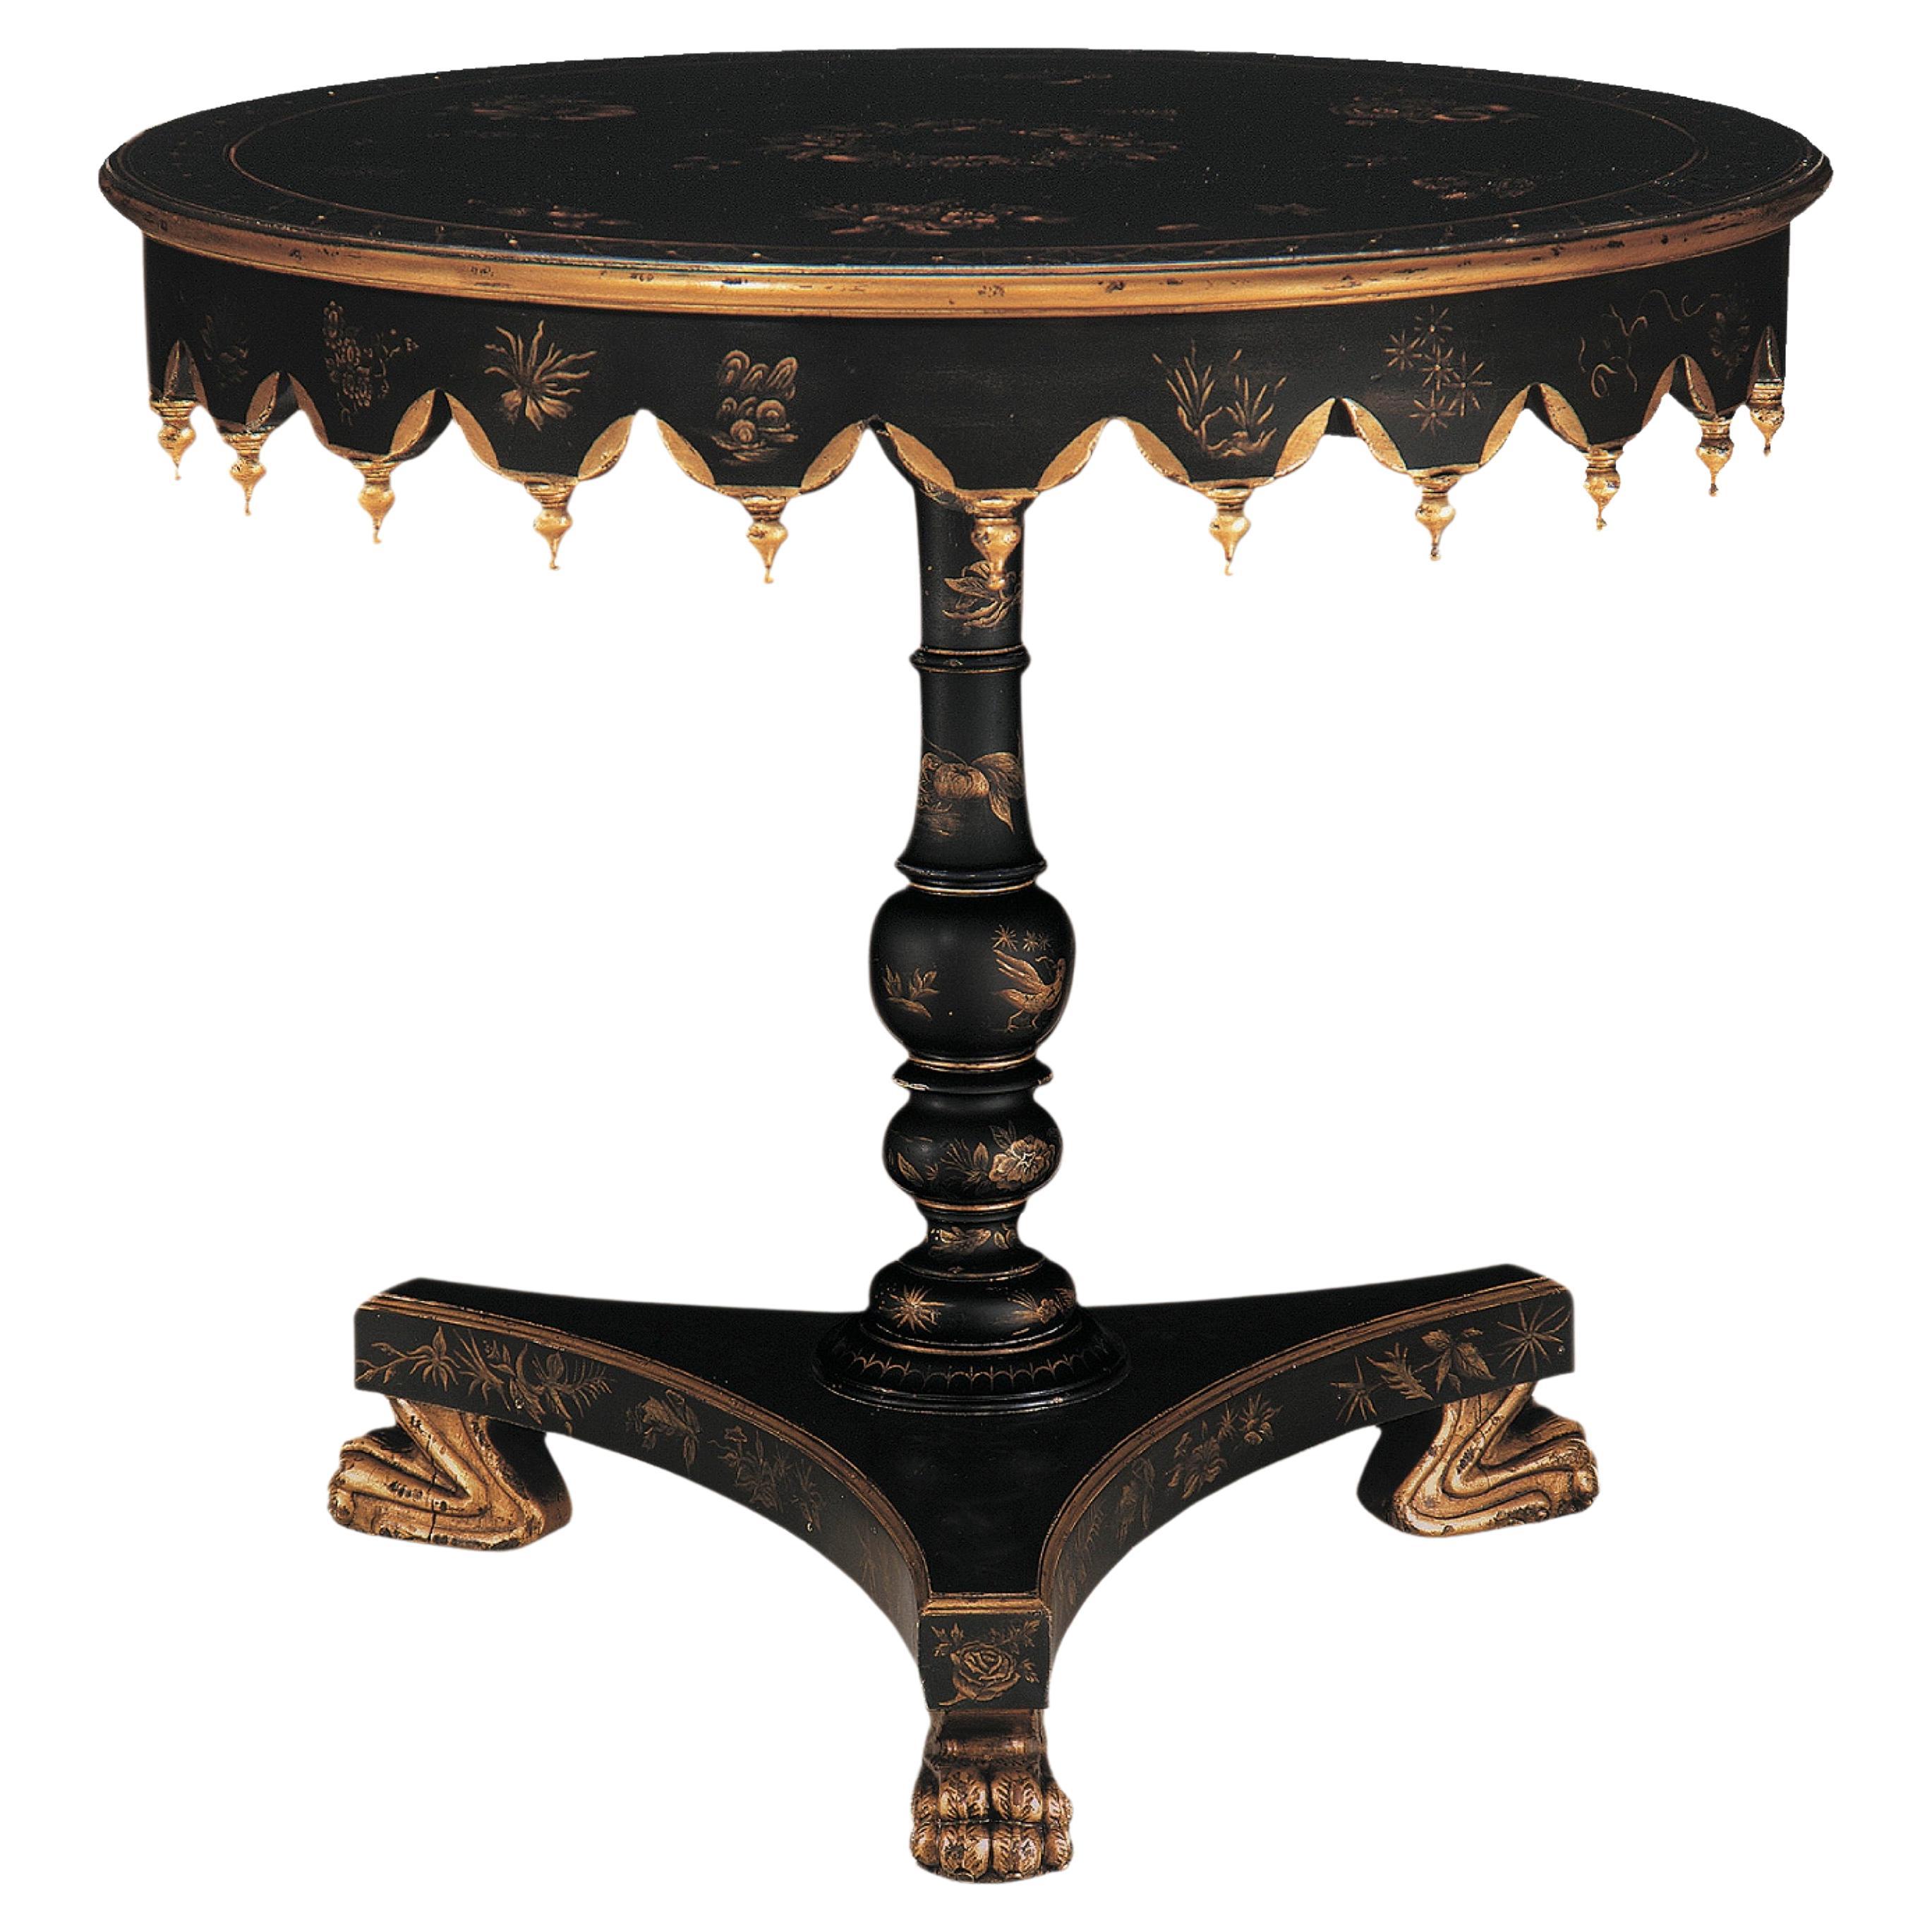 Essex Lamp Table. Hand-painted with floral motifs in gold and gilded details For Sale